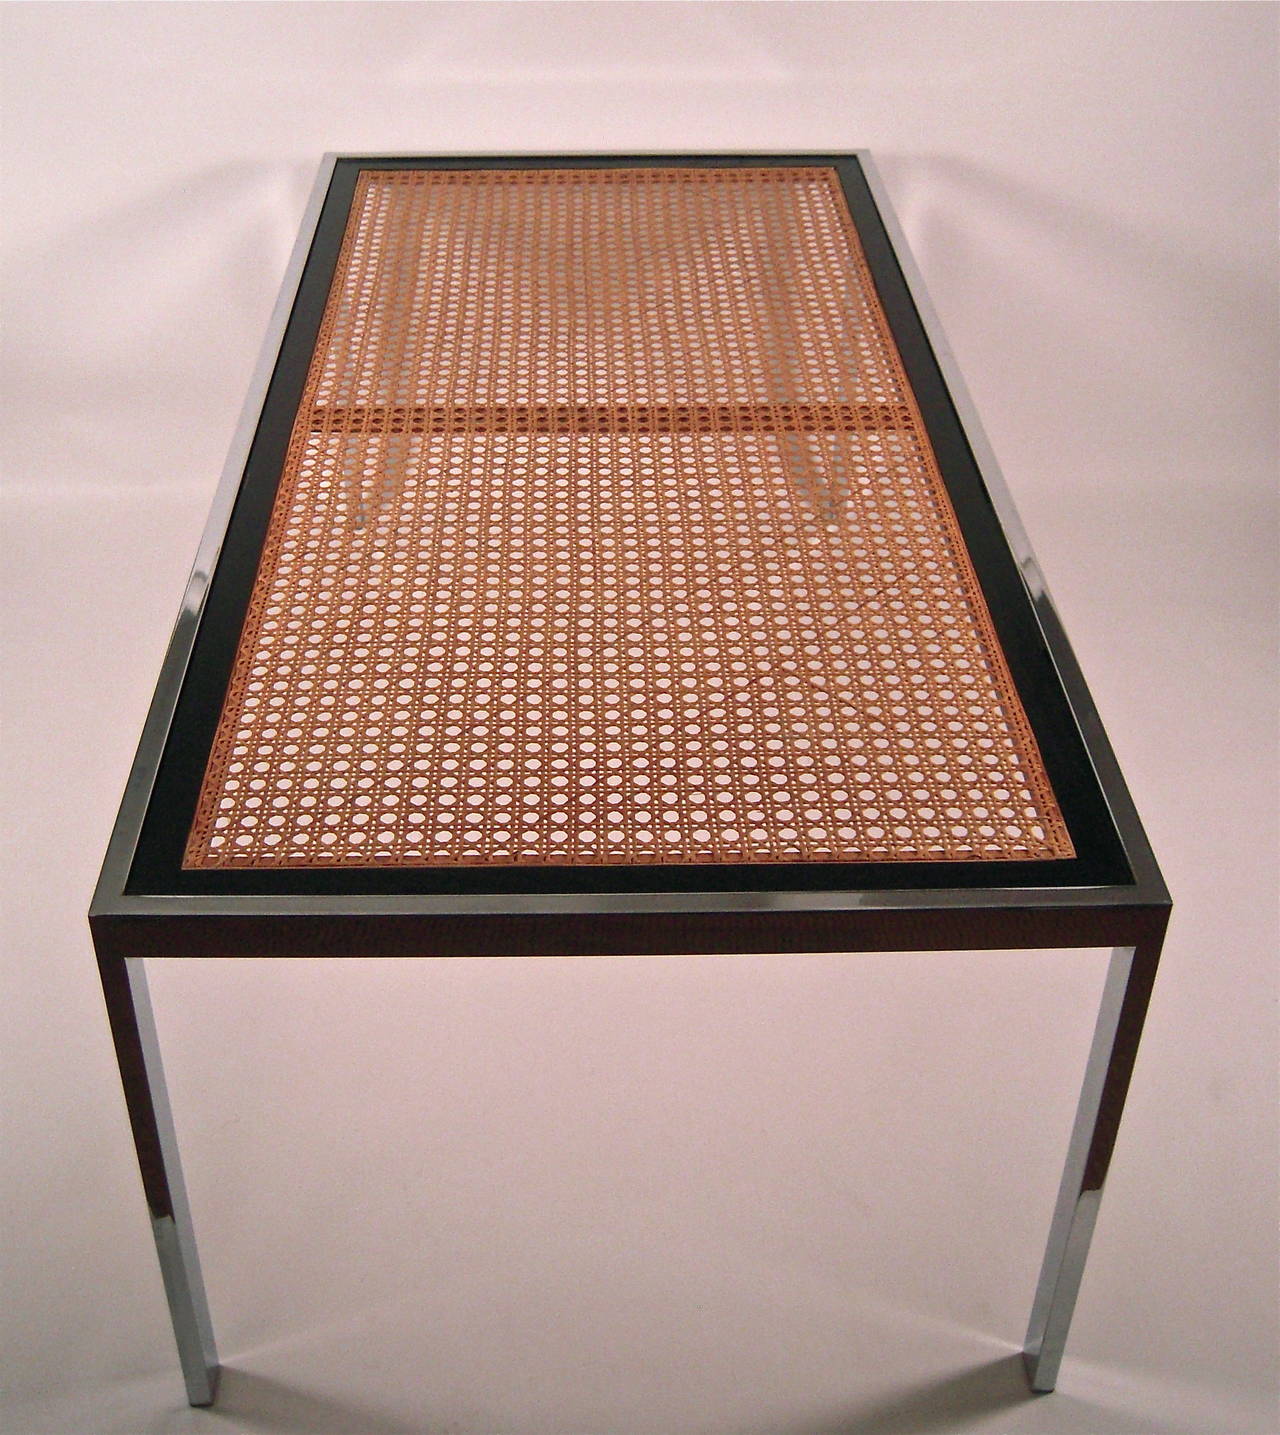 A Milo Baughman designed dining table for Thayer Coggin, American, circa 1970s, in superb condition, of rectangular form, the inset glass top supported by an ebonized hardwood and natural caned frame, within a chromed metal square